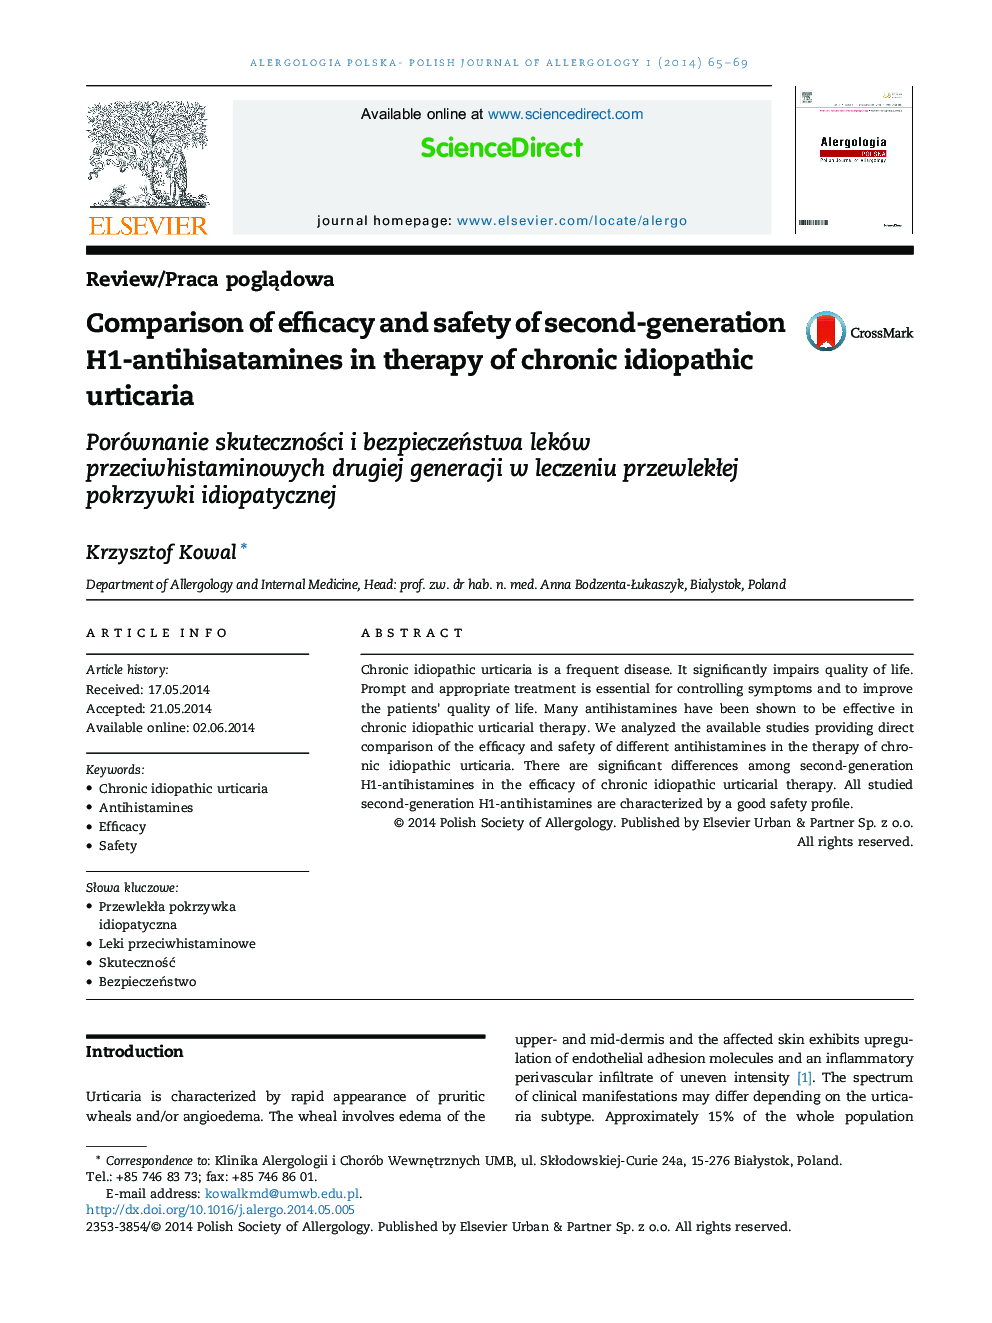 Comparison of efficacy and safety of second-generation H1-antihisatamines in therapy of chronic idiopathic urticaria